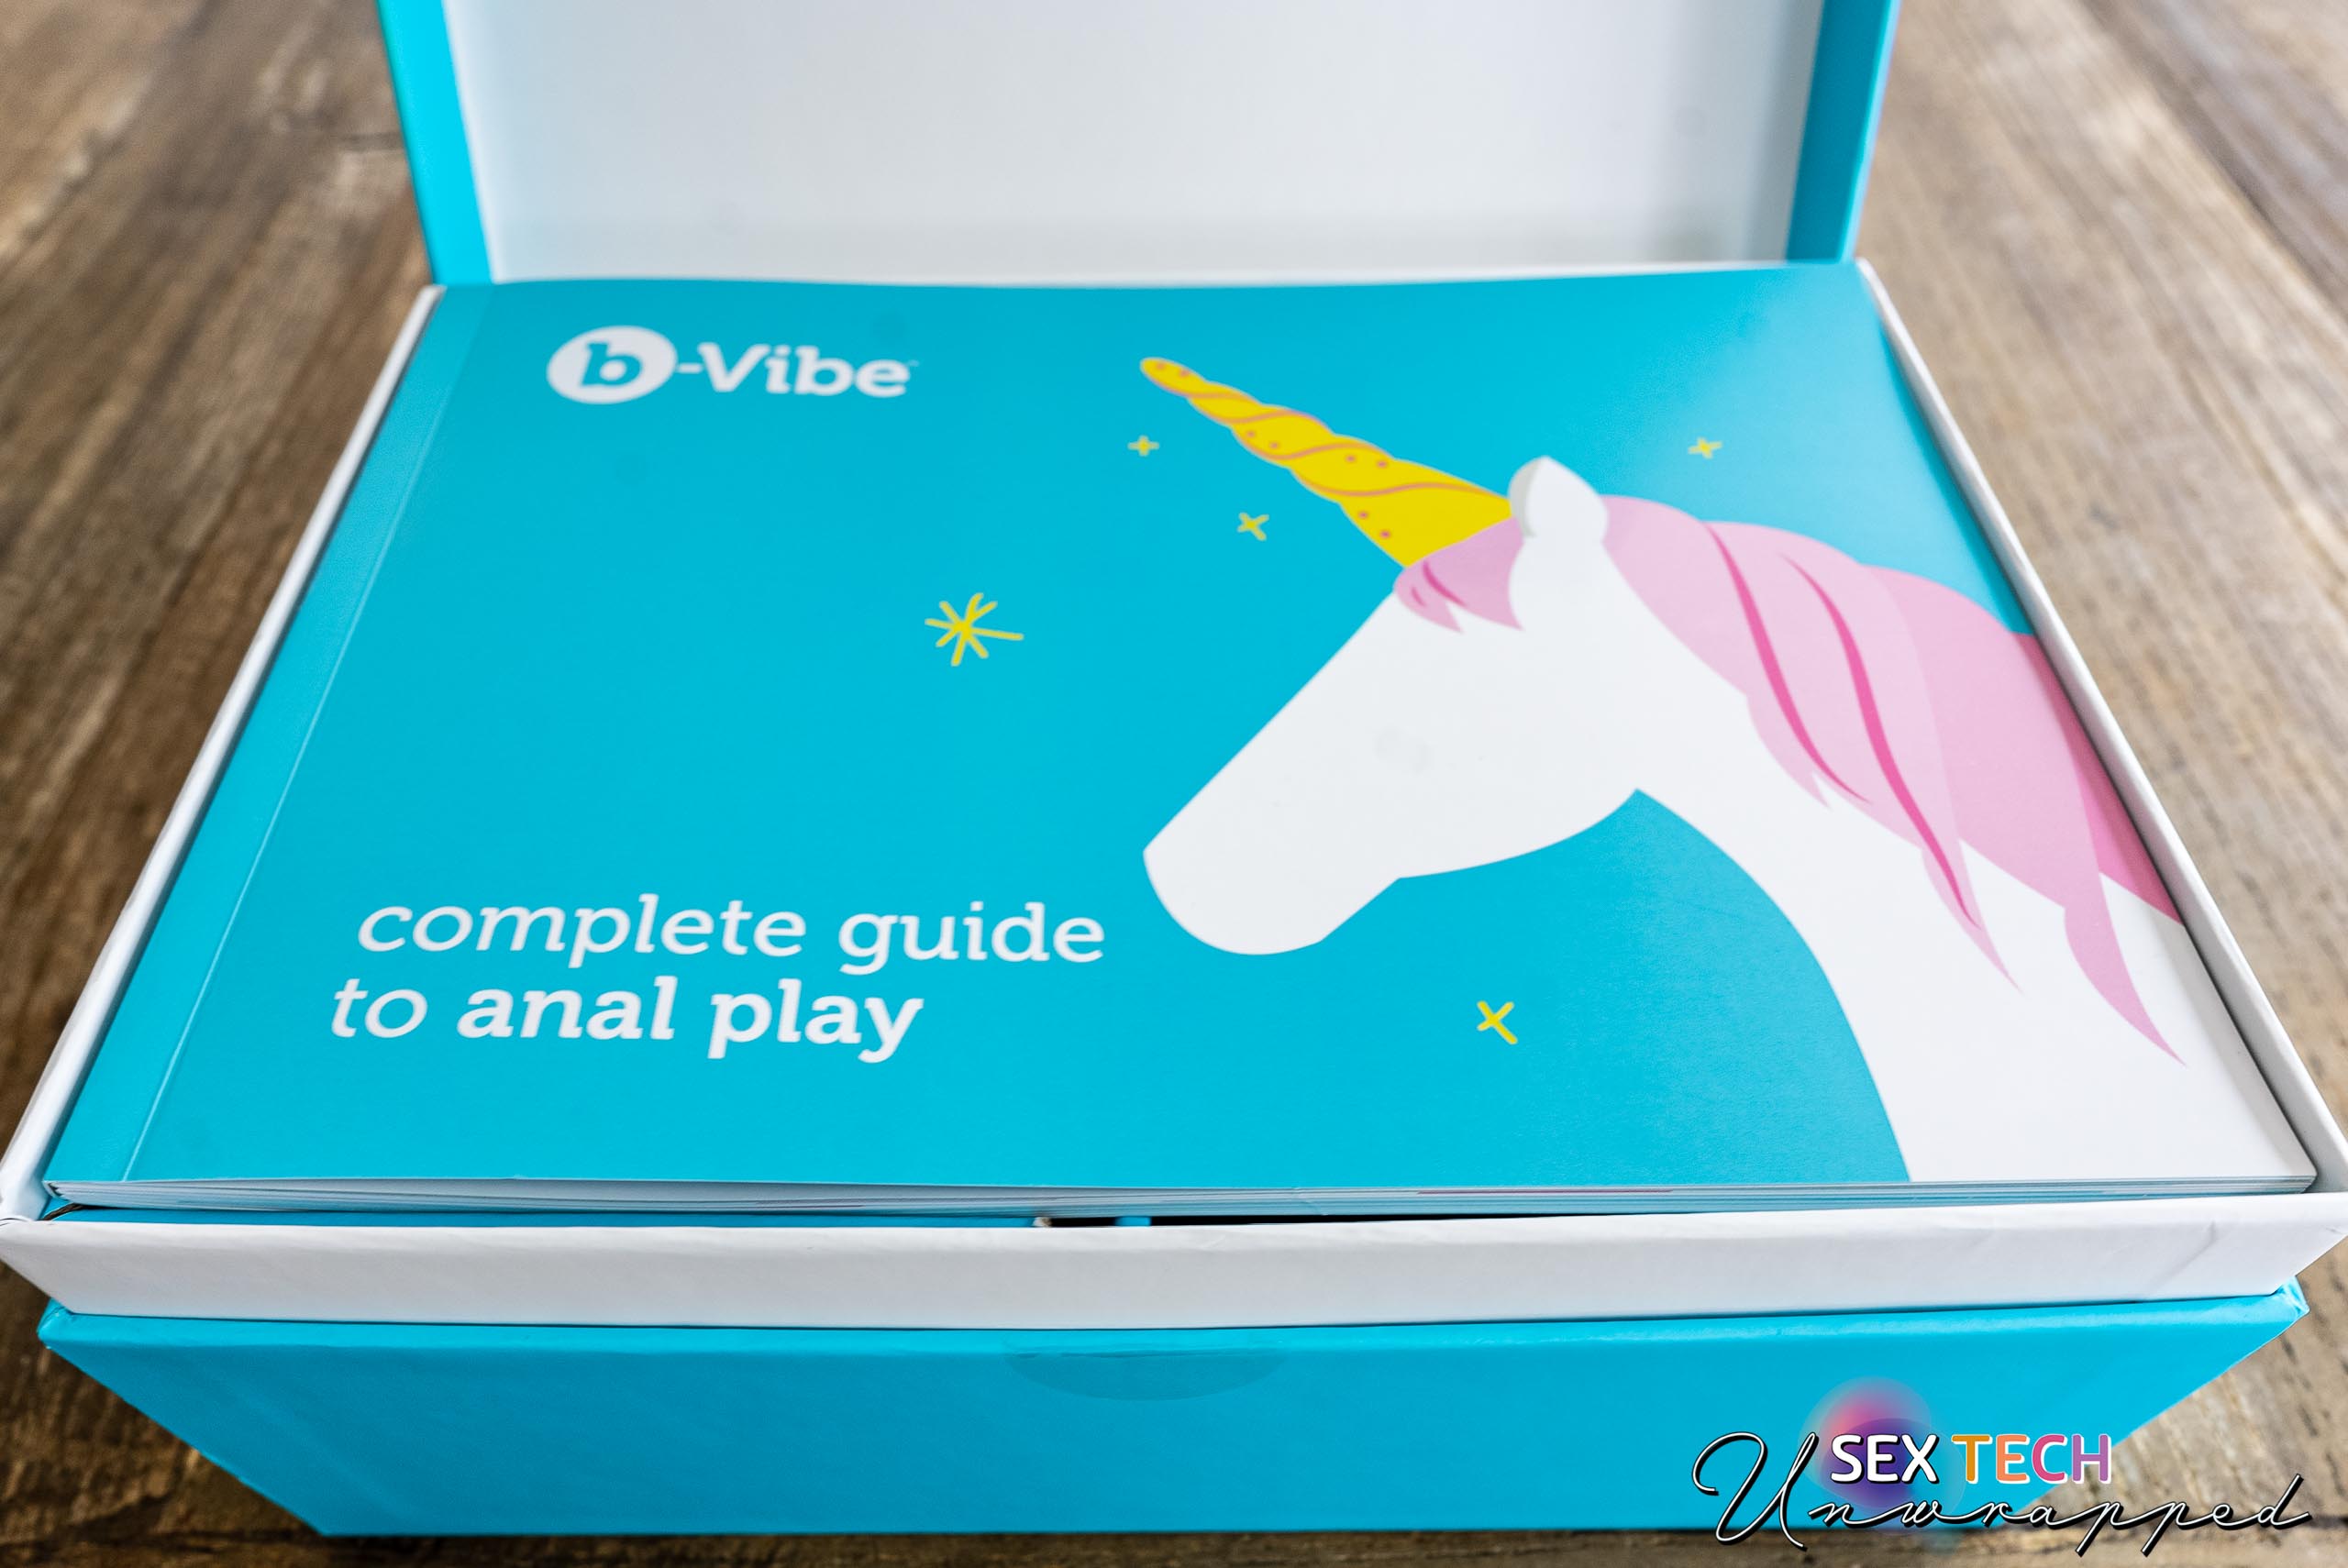 Opening the b-Vibe anal training and education set box